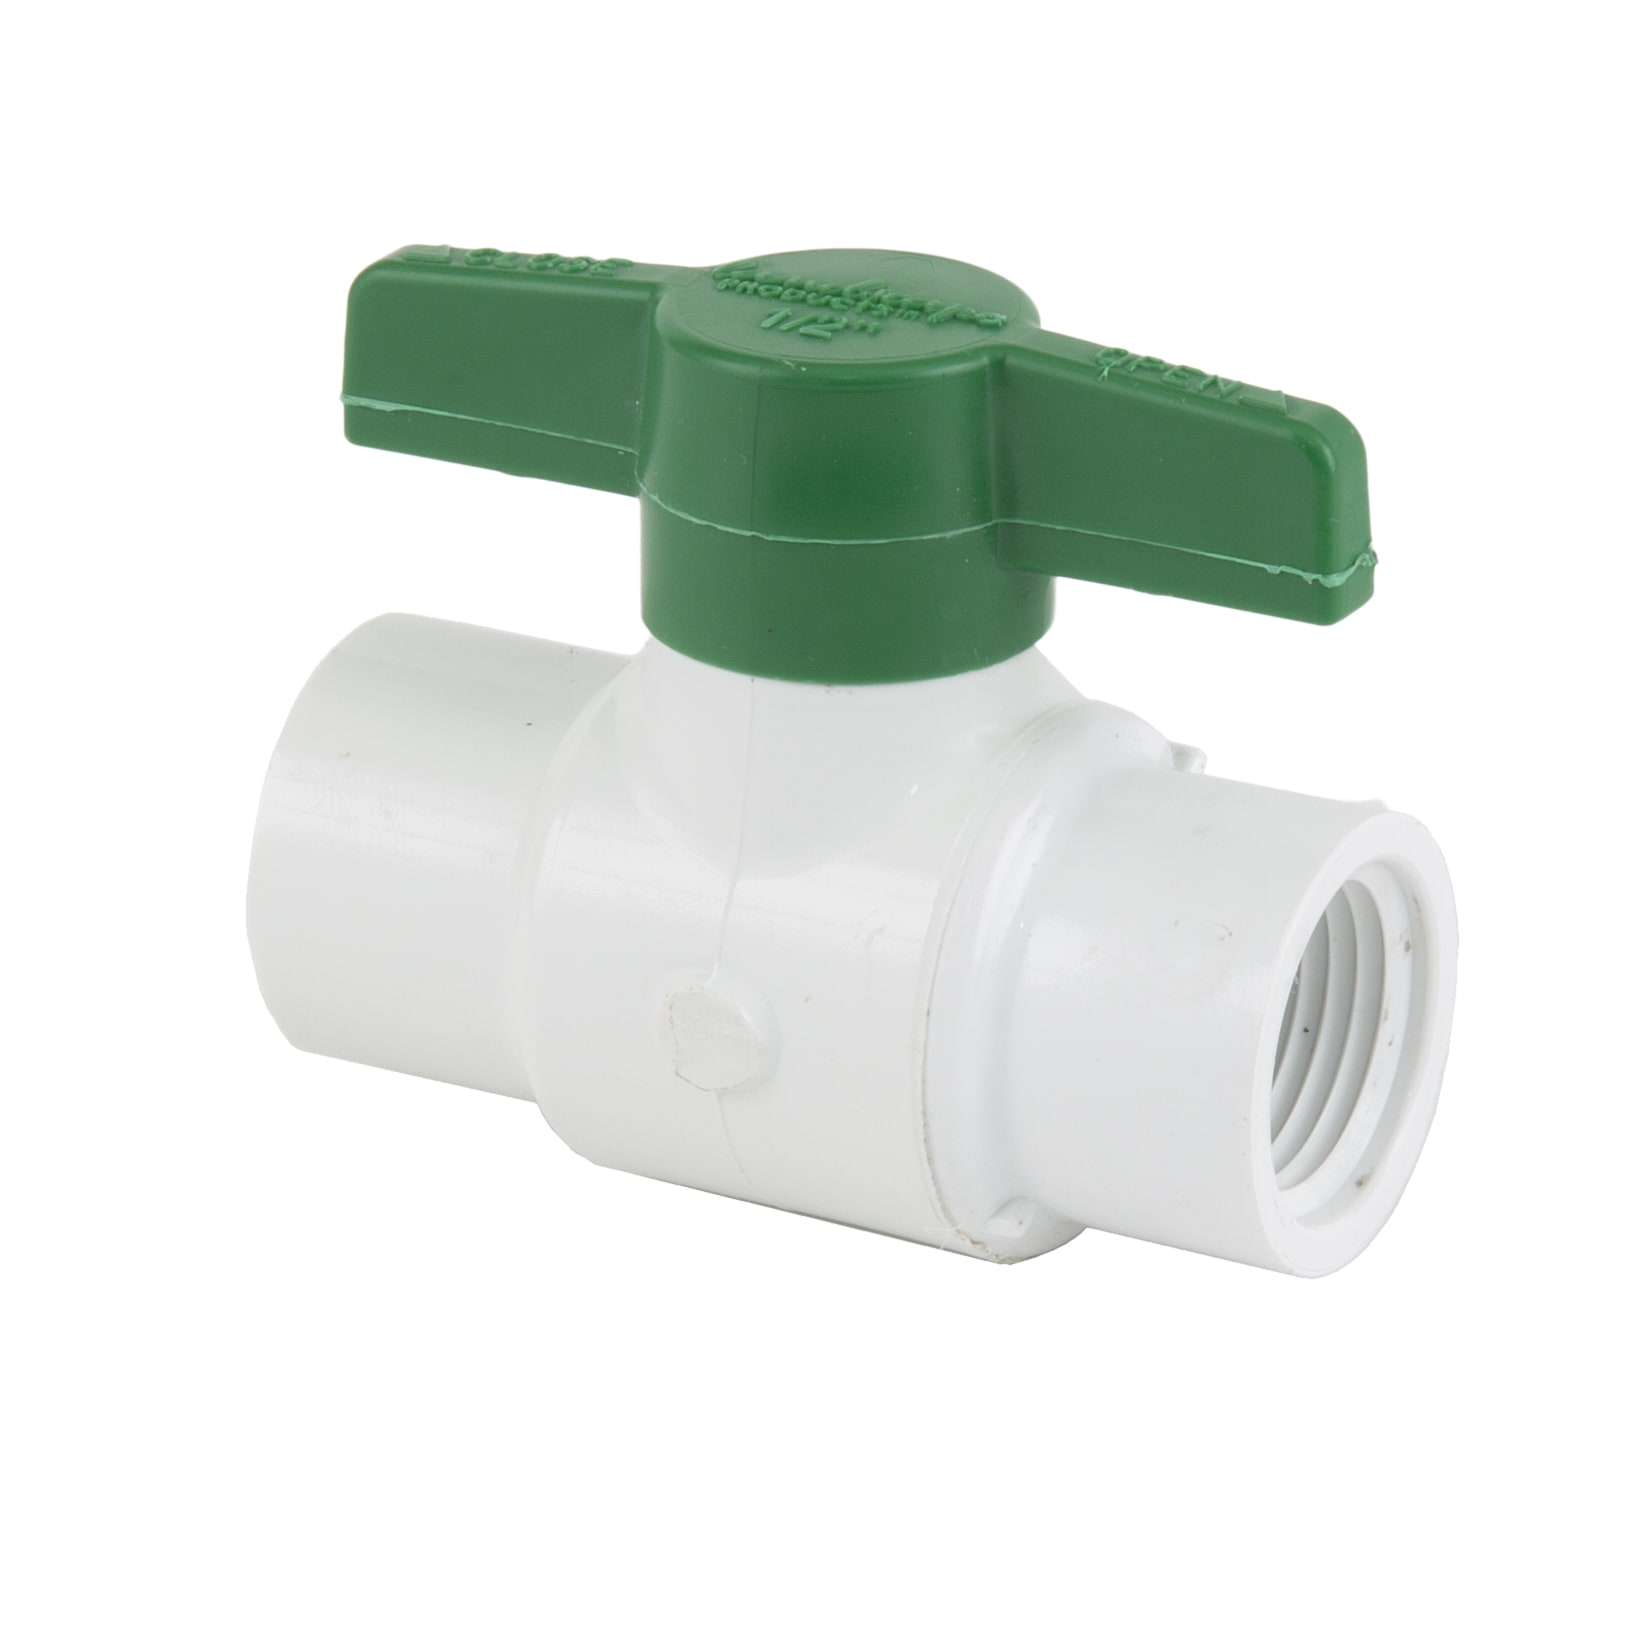 1/2-inch Threaded Plastic Ball Valve - Landscape Products Inc.